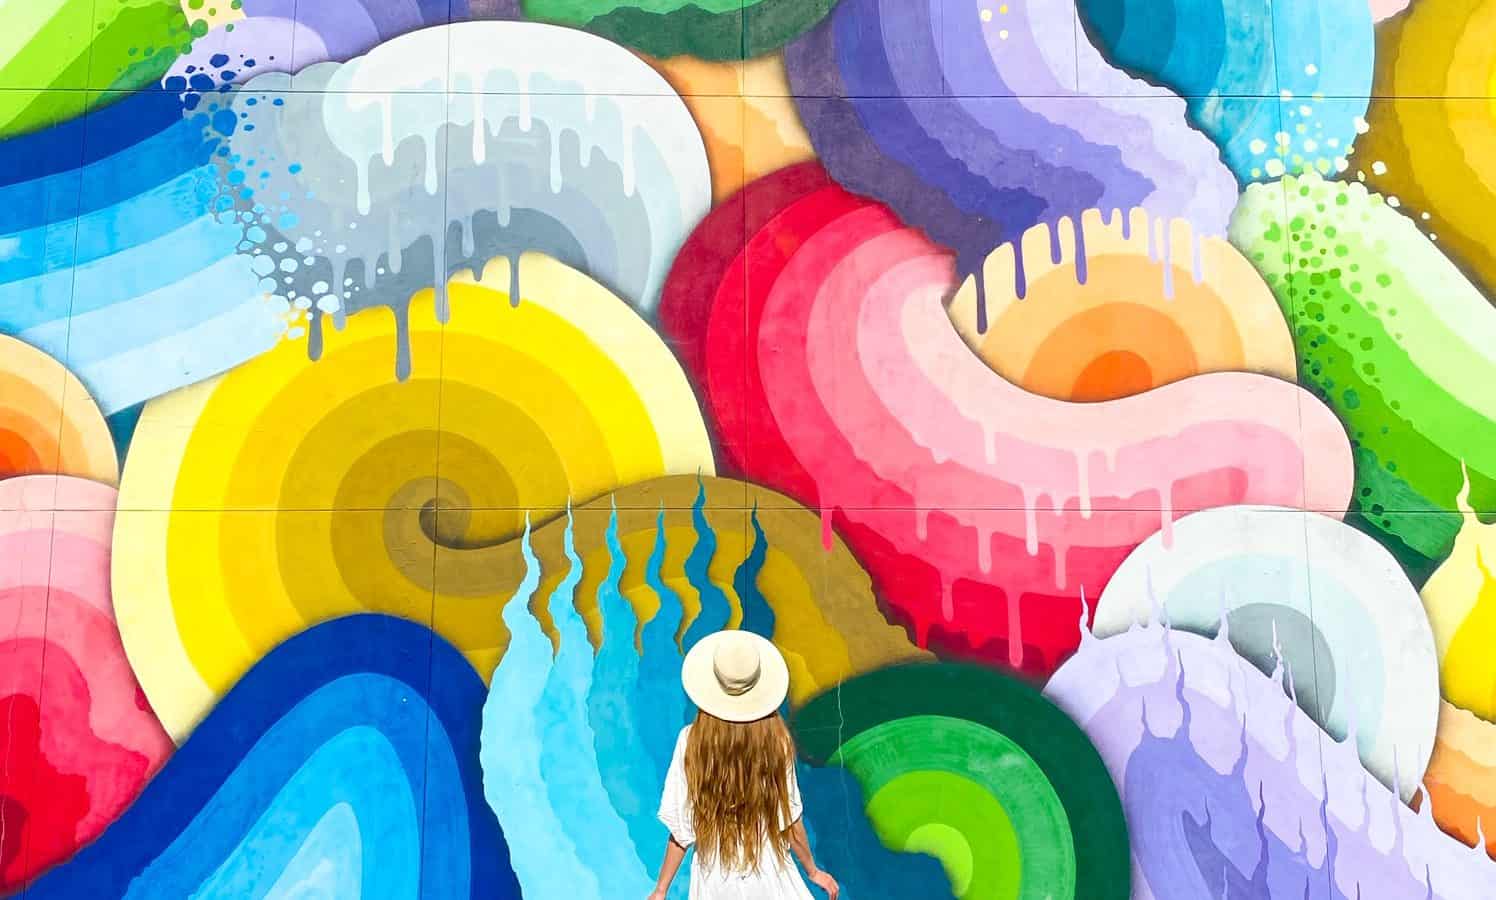 The beautiful colorful murals are one of the best things to do in St. Petersburg Florida